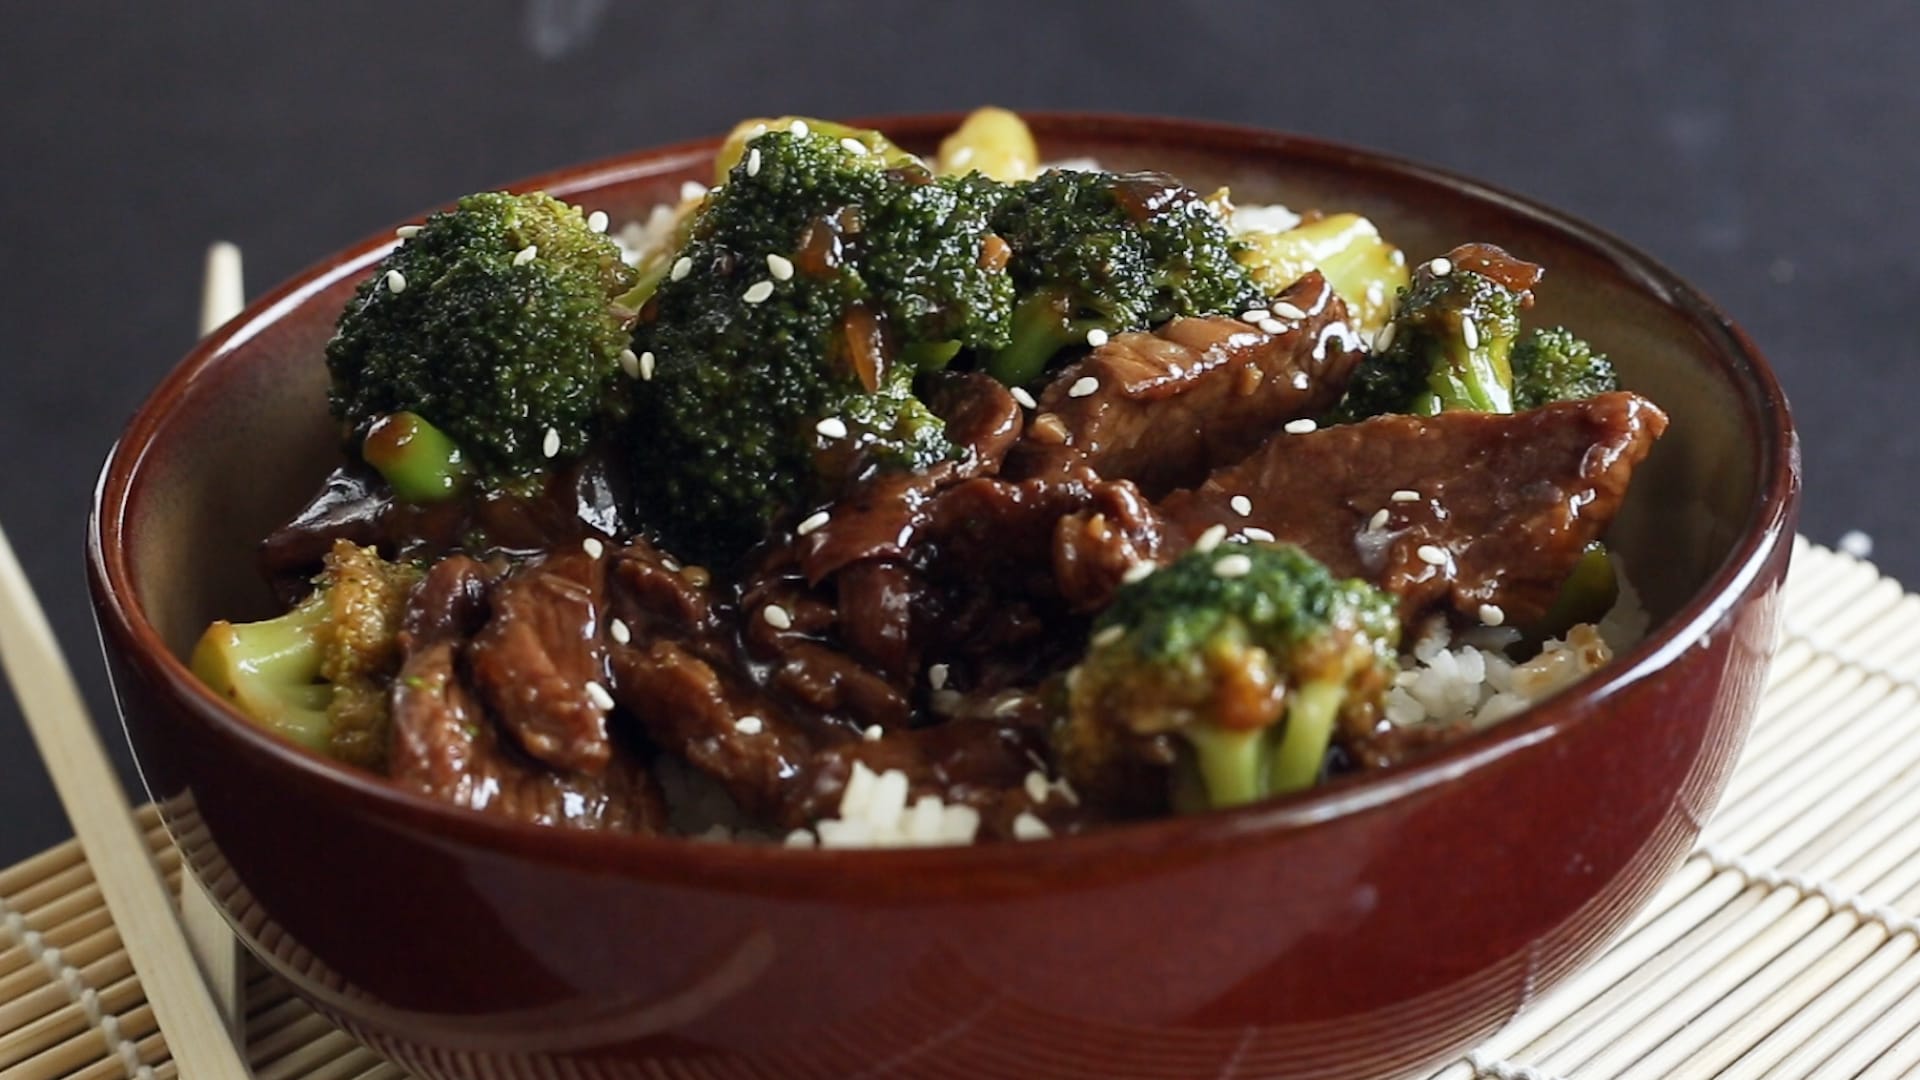 Quick Roasted Broccoli with Soy Sauce and Sesame (Video) – Kalyn's